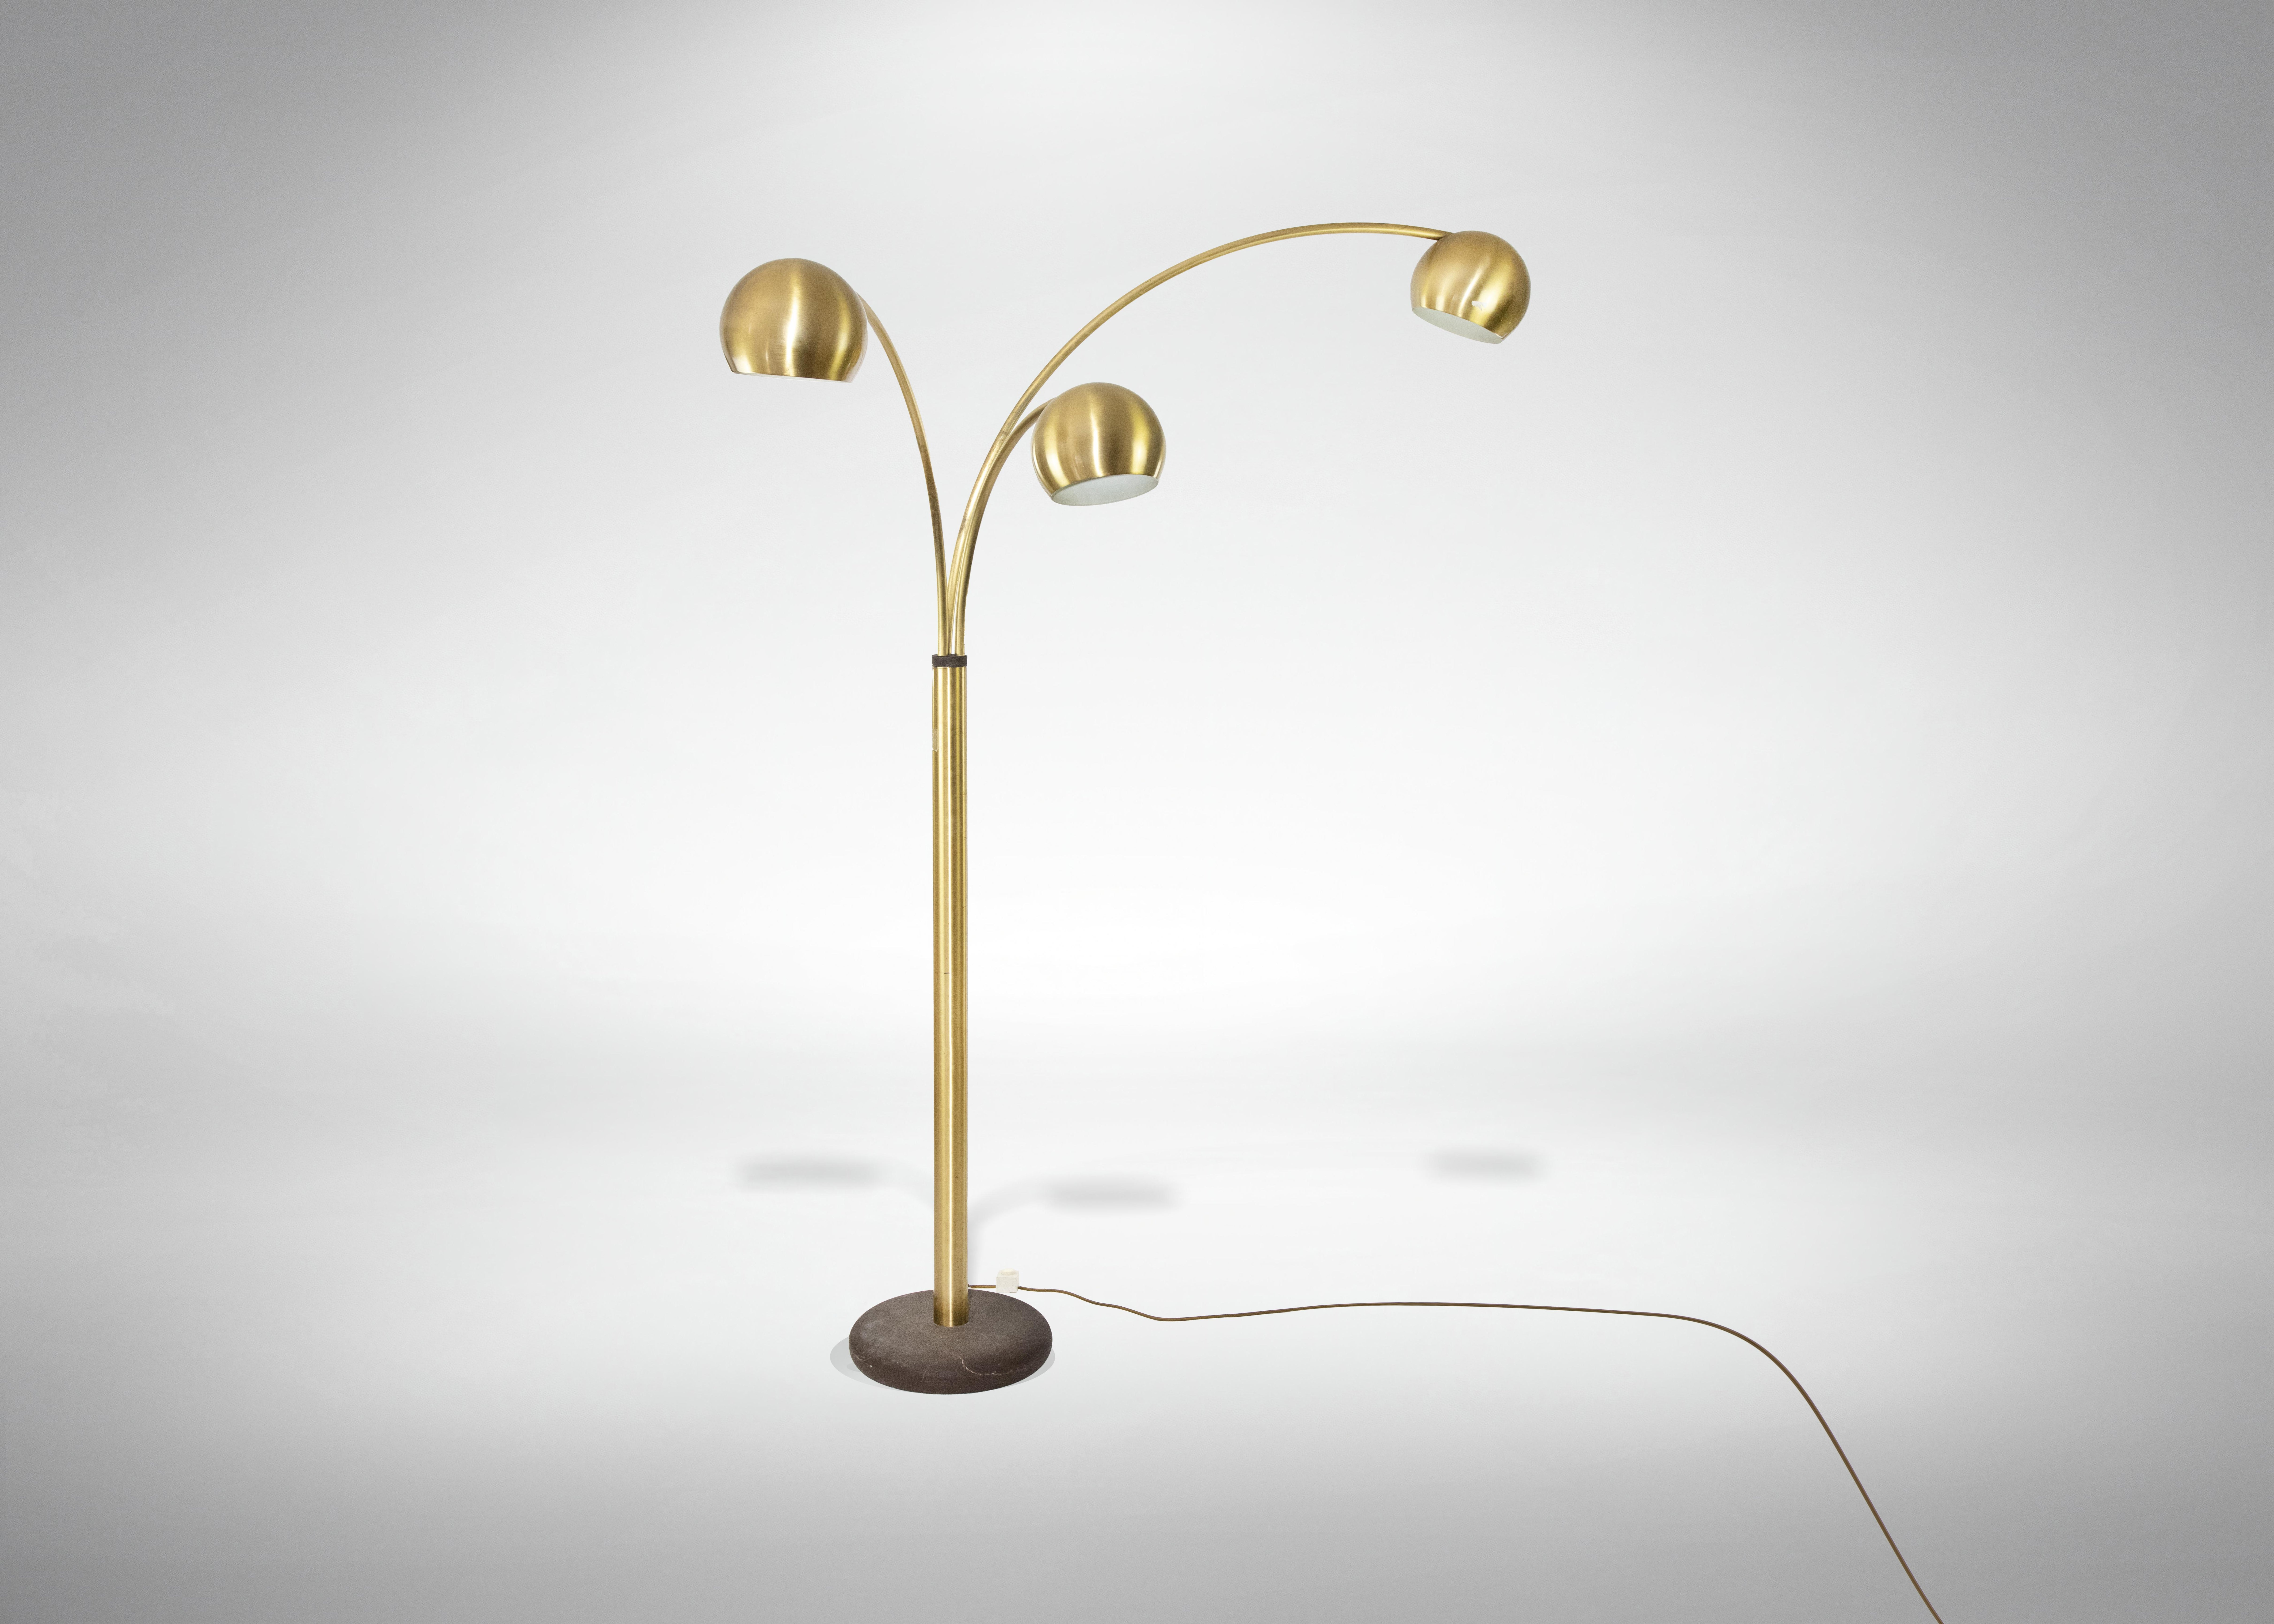 Lacquered Vintage Brass Floor Lamp Attributed to Goffredo Reggiani, 1970s For Sale